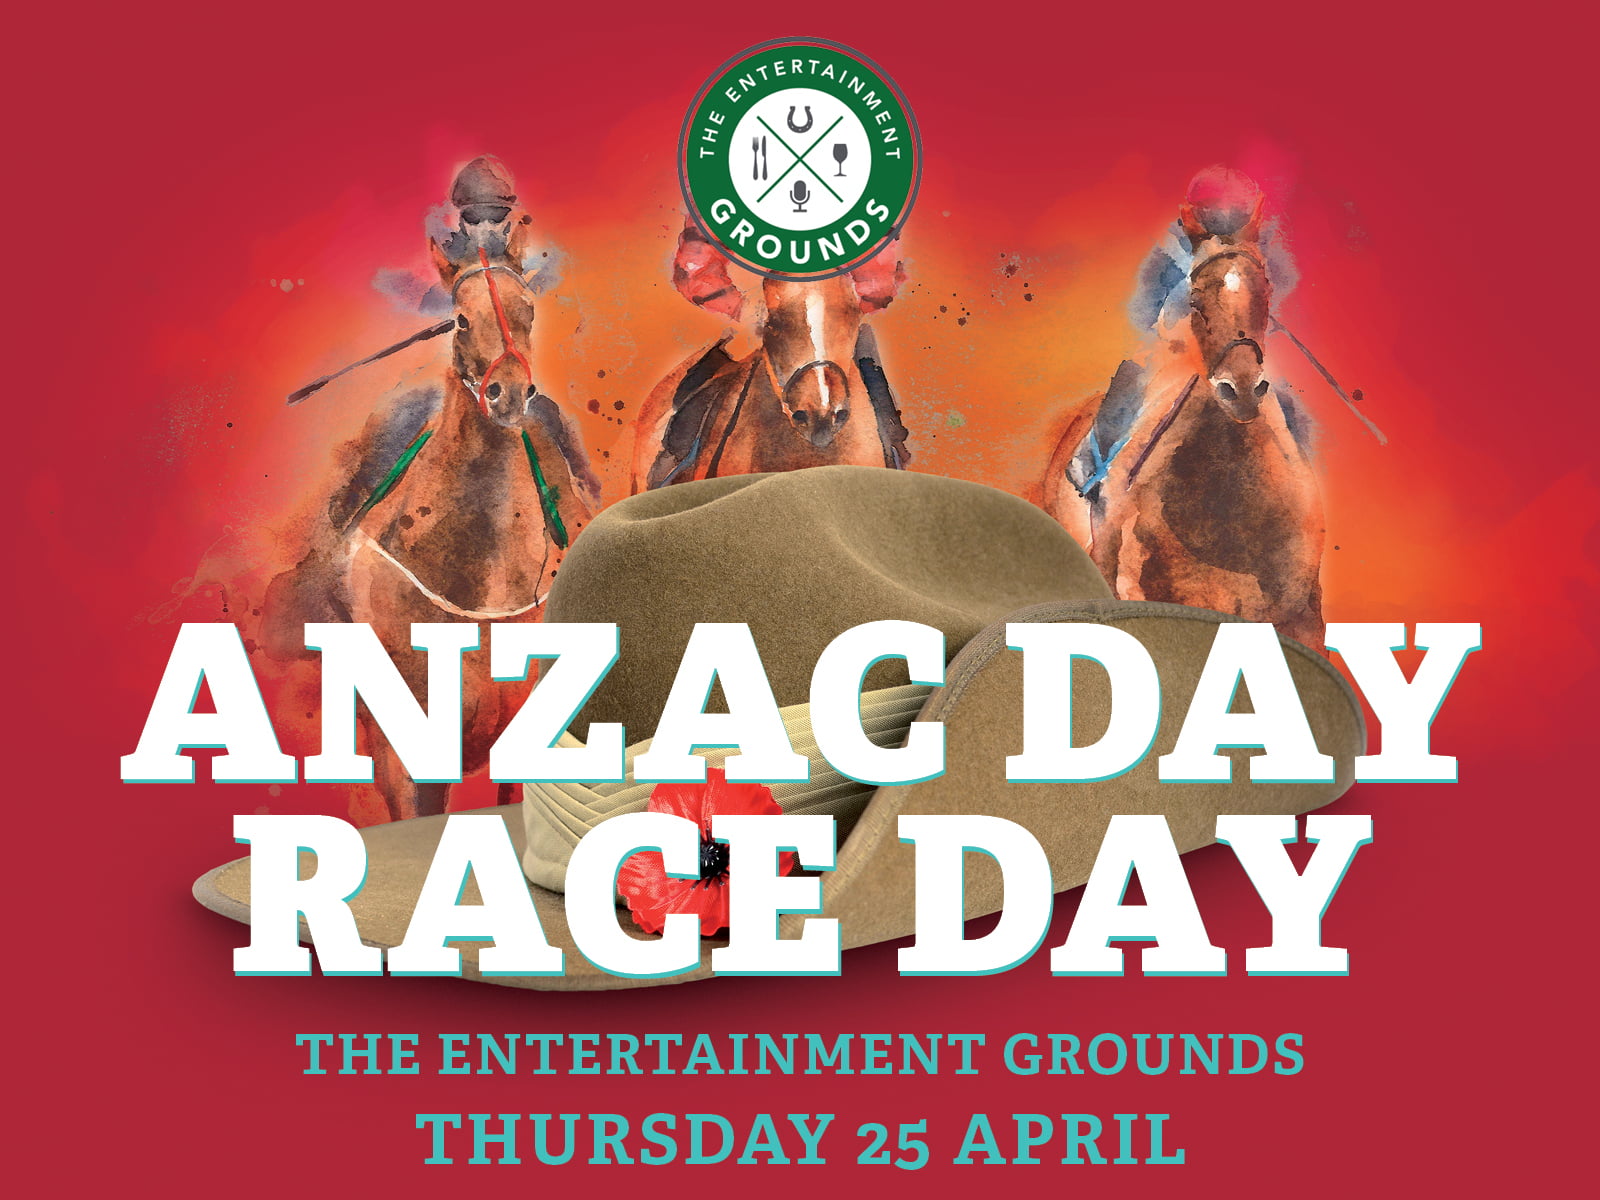 ANZAC DAY RACE DAY